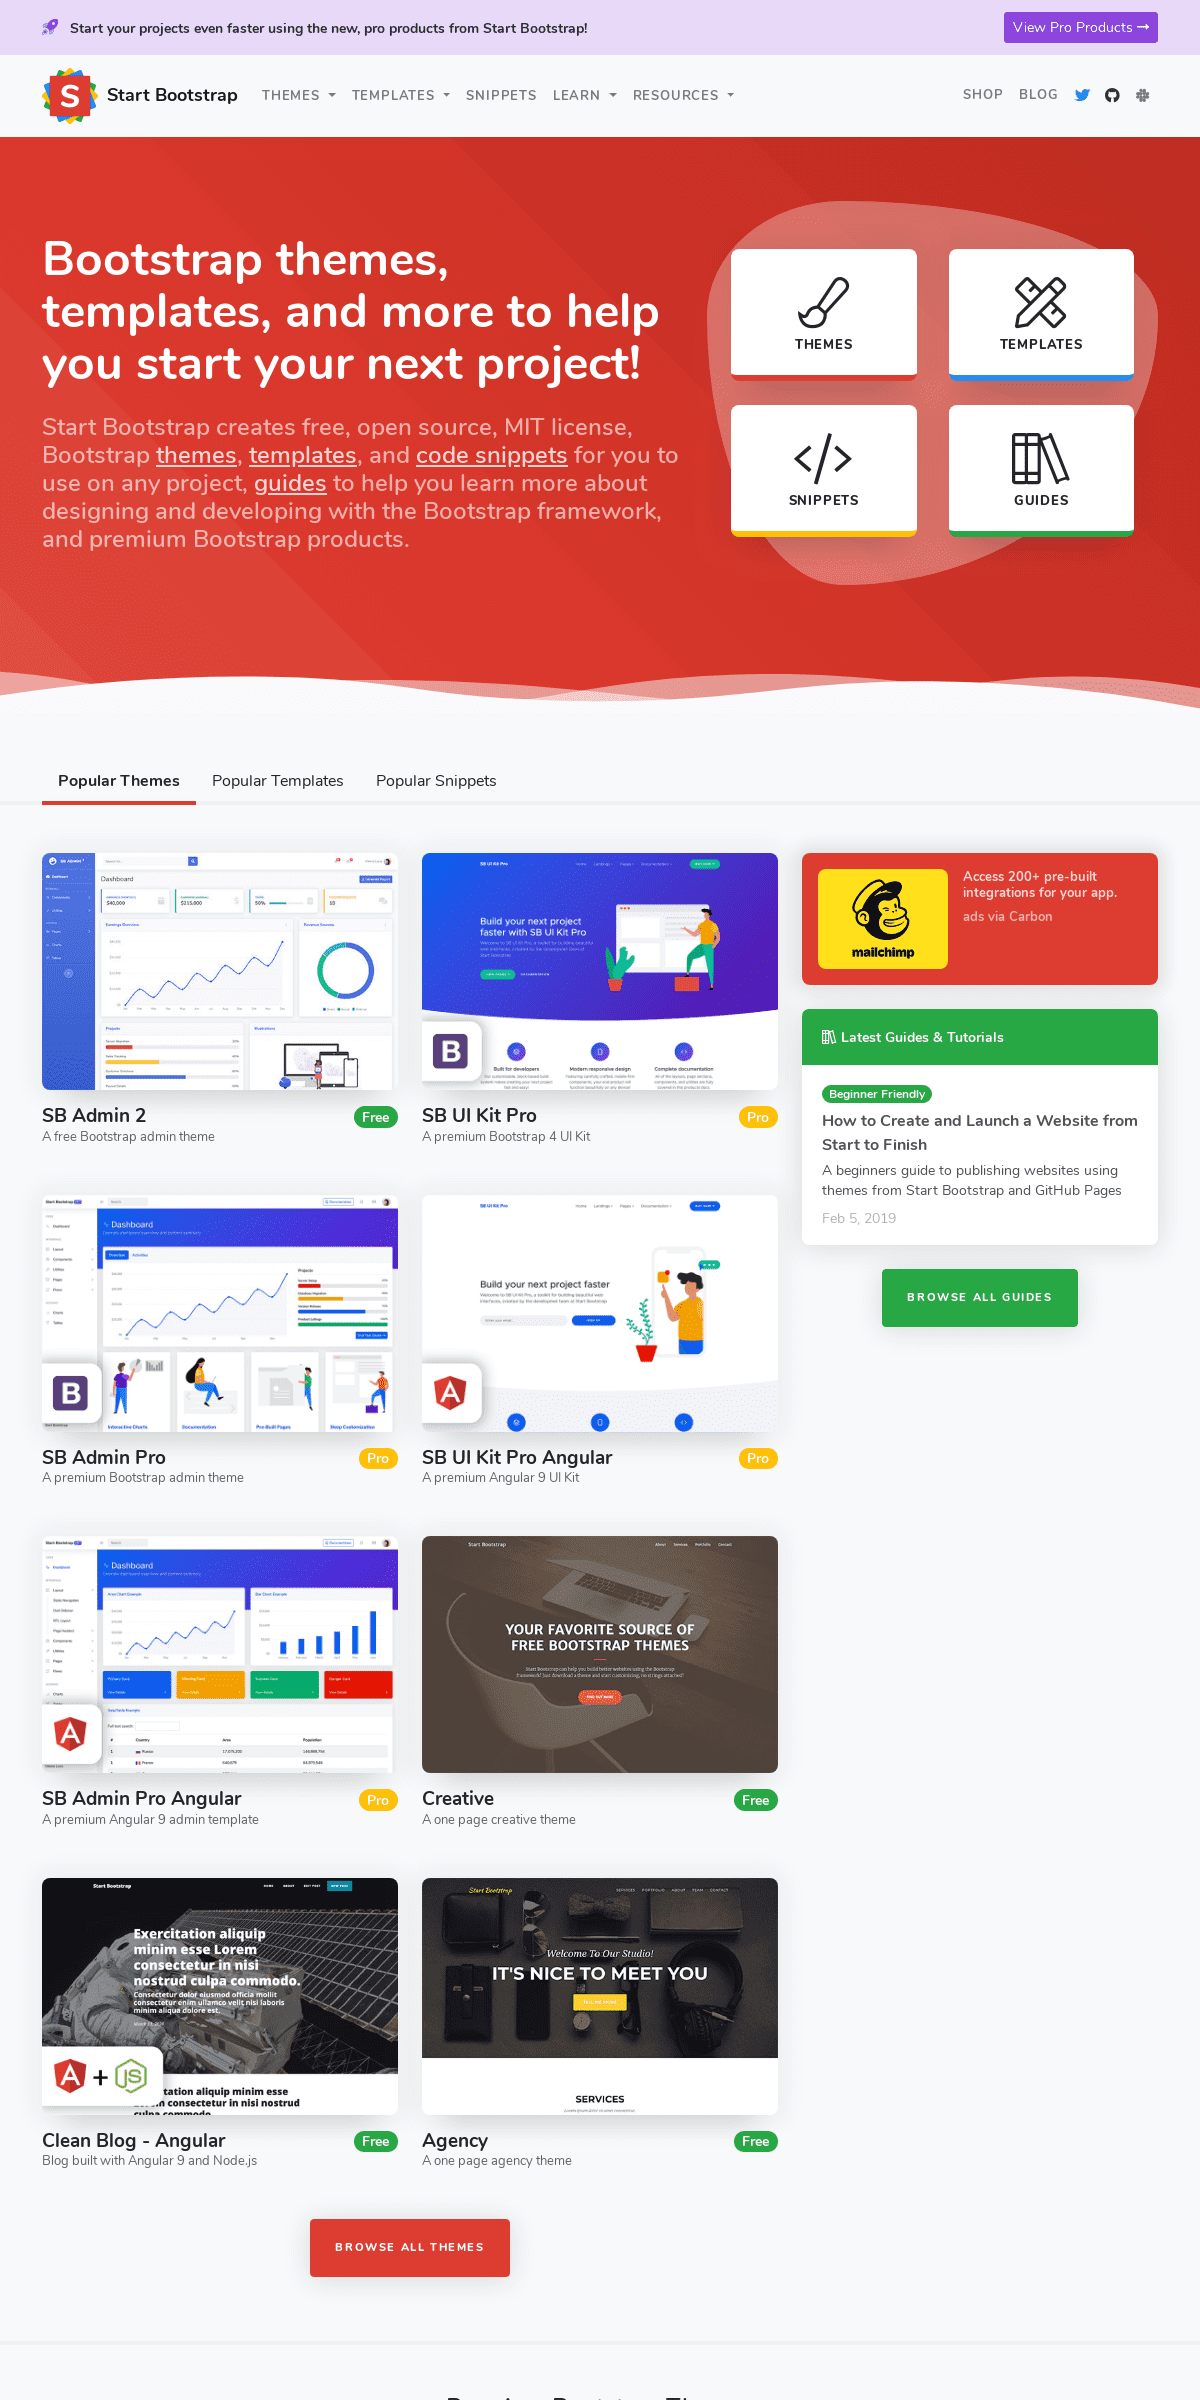 Free Bootstrap Themes, Templates, Snippets, and Guides - Start Bootstrap